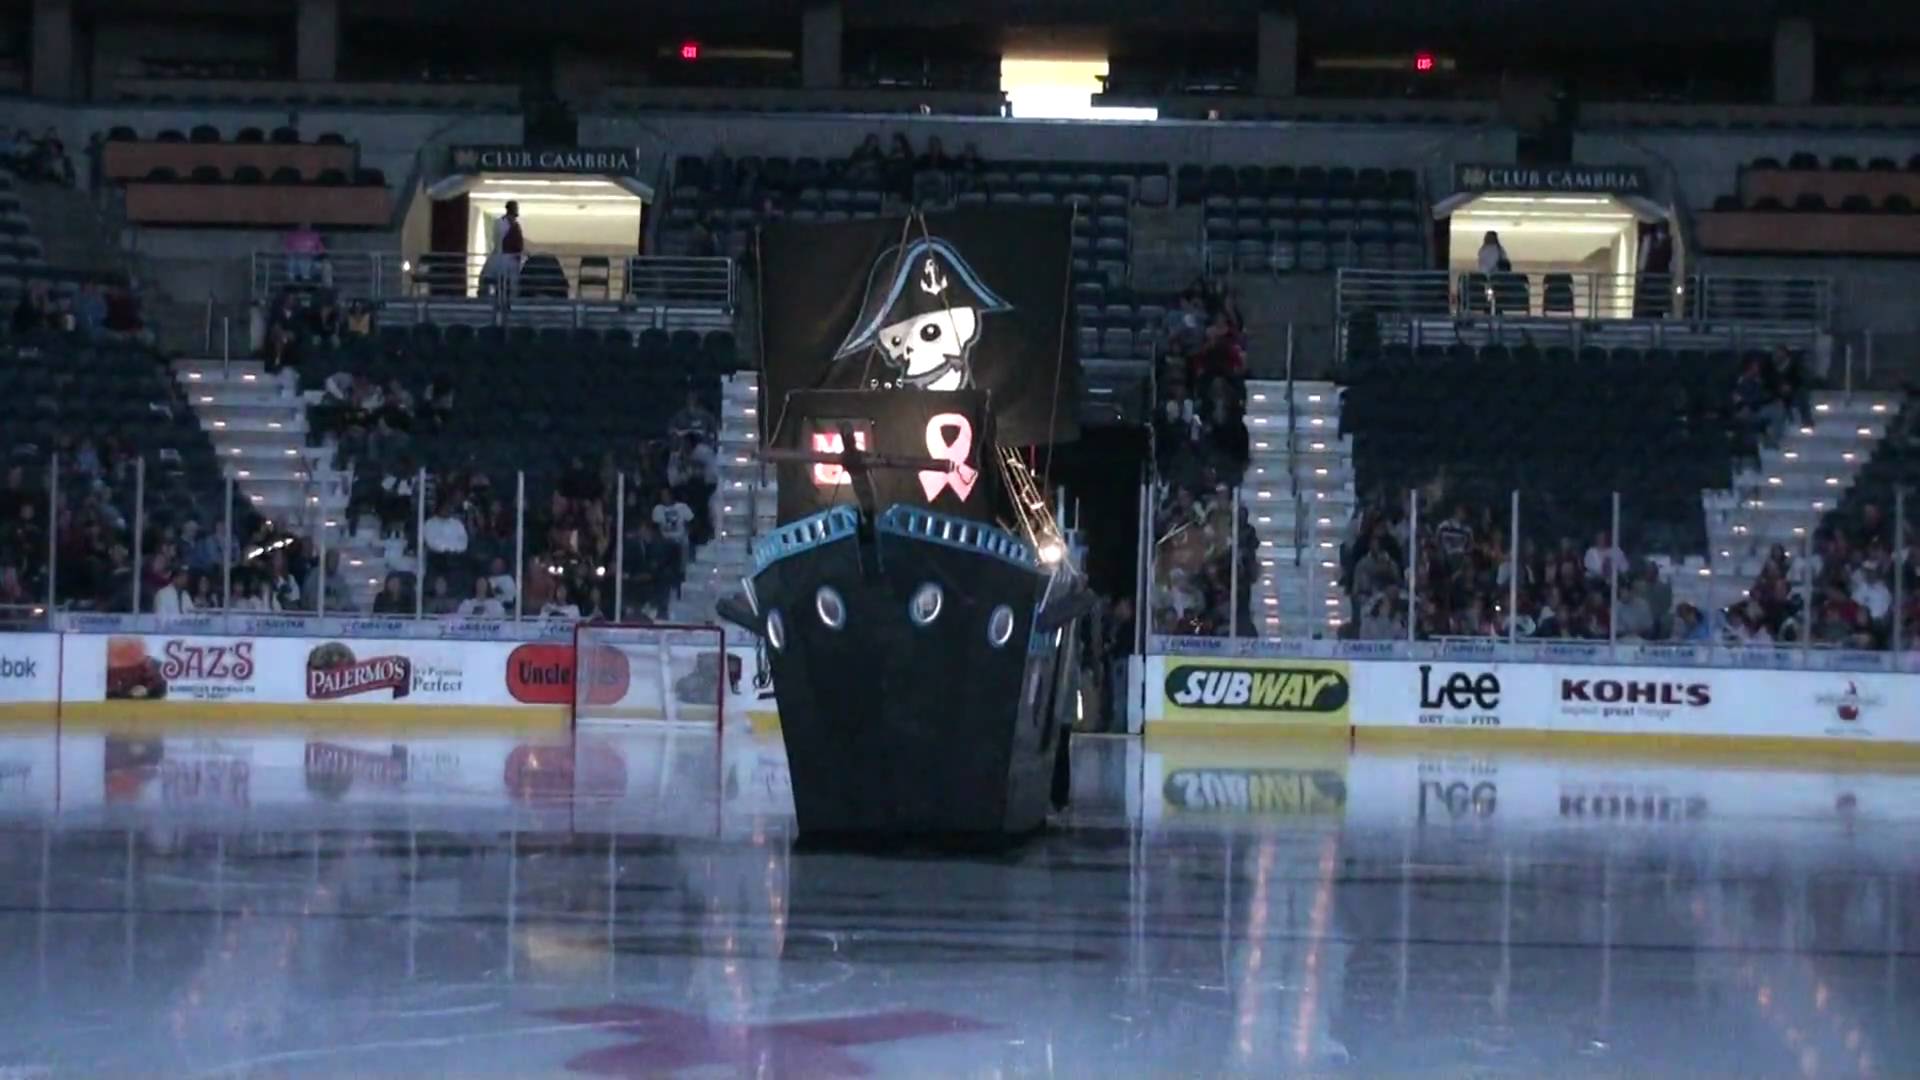 The Milwaukee Admirals home opener and the Admirals Ship